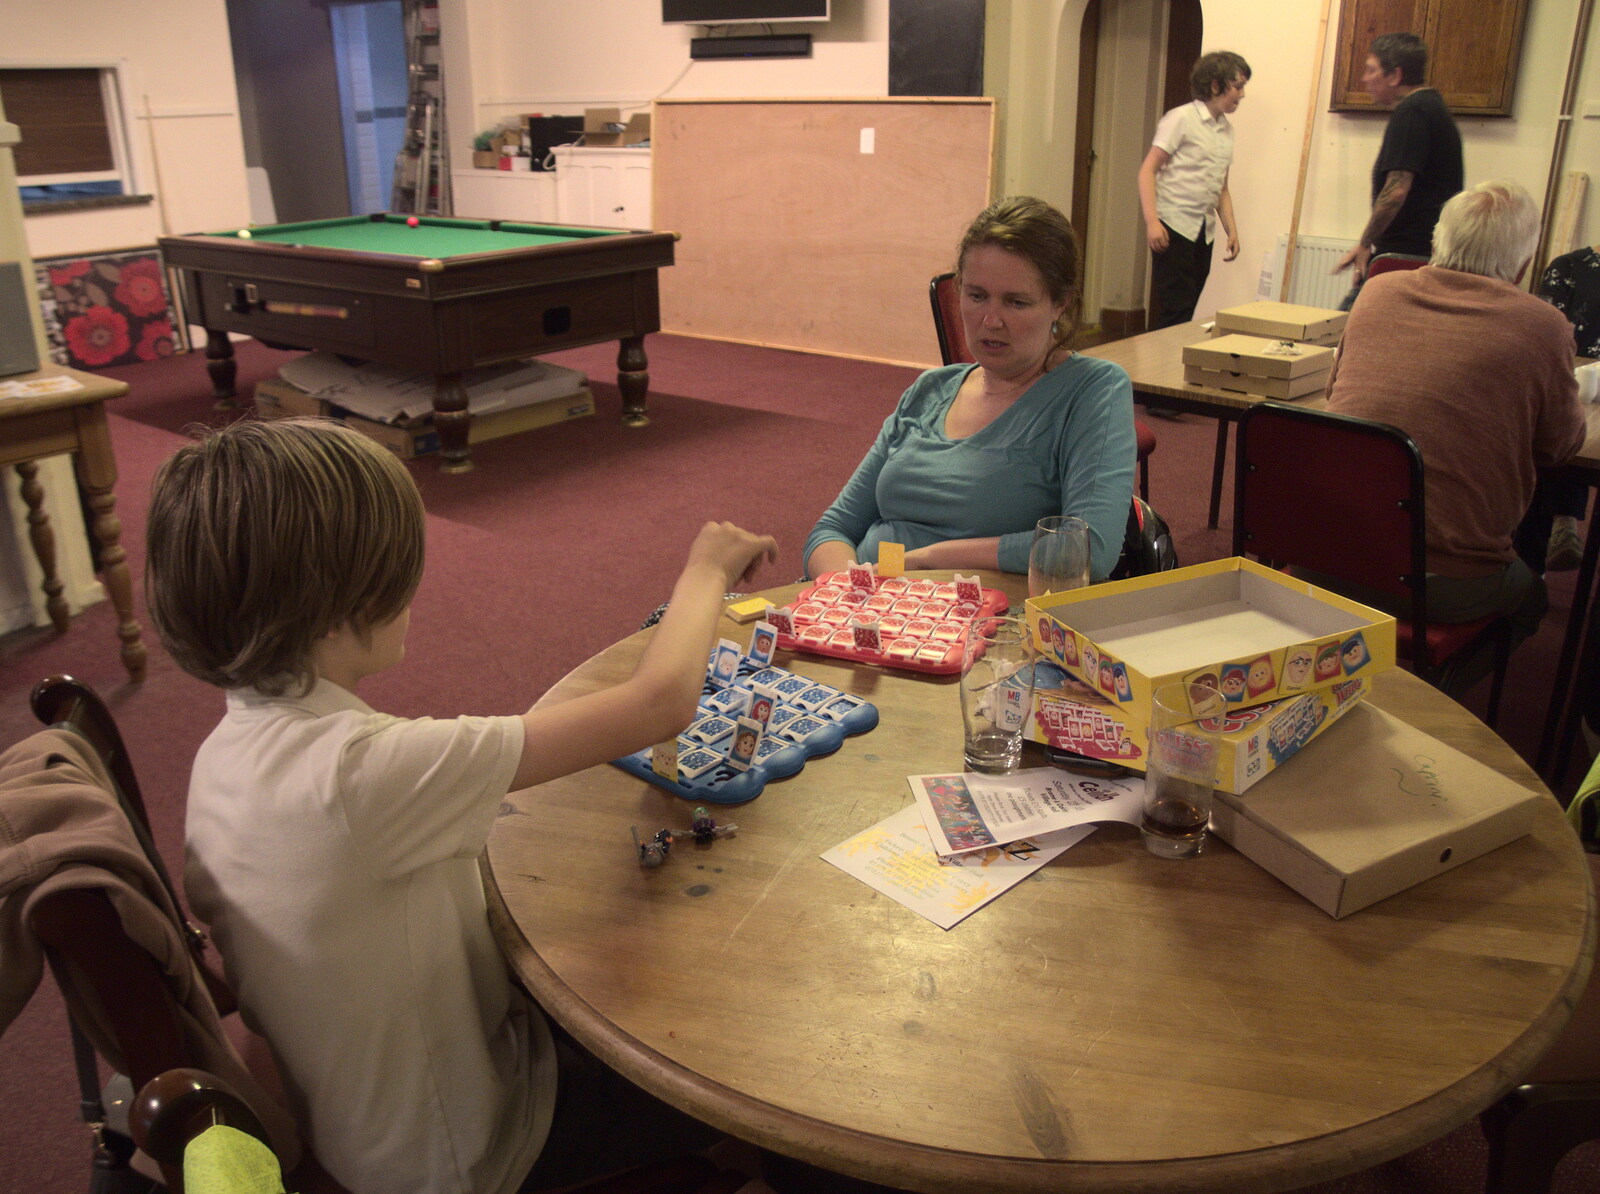 Harry and Isobel from Pizza at the Village Hall, Brome, Suffolk - 24th June 2022